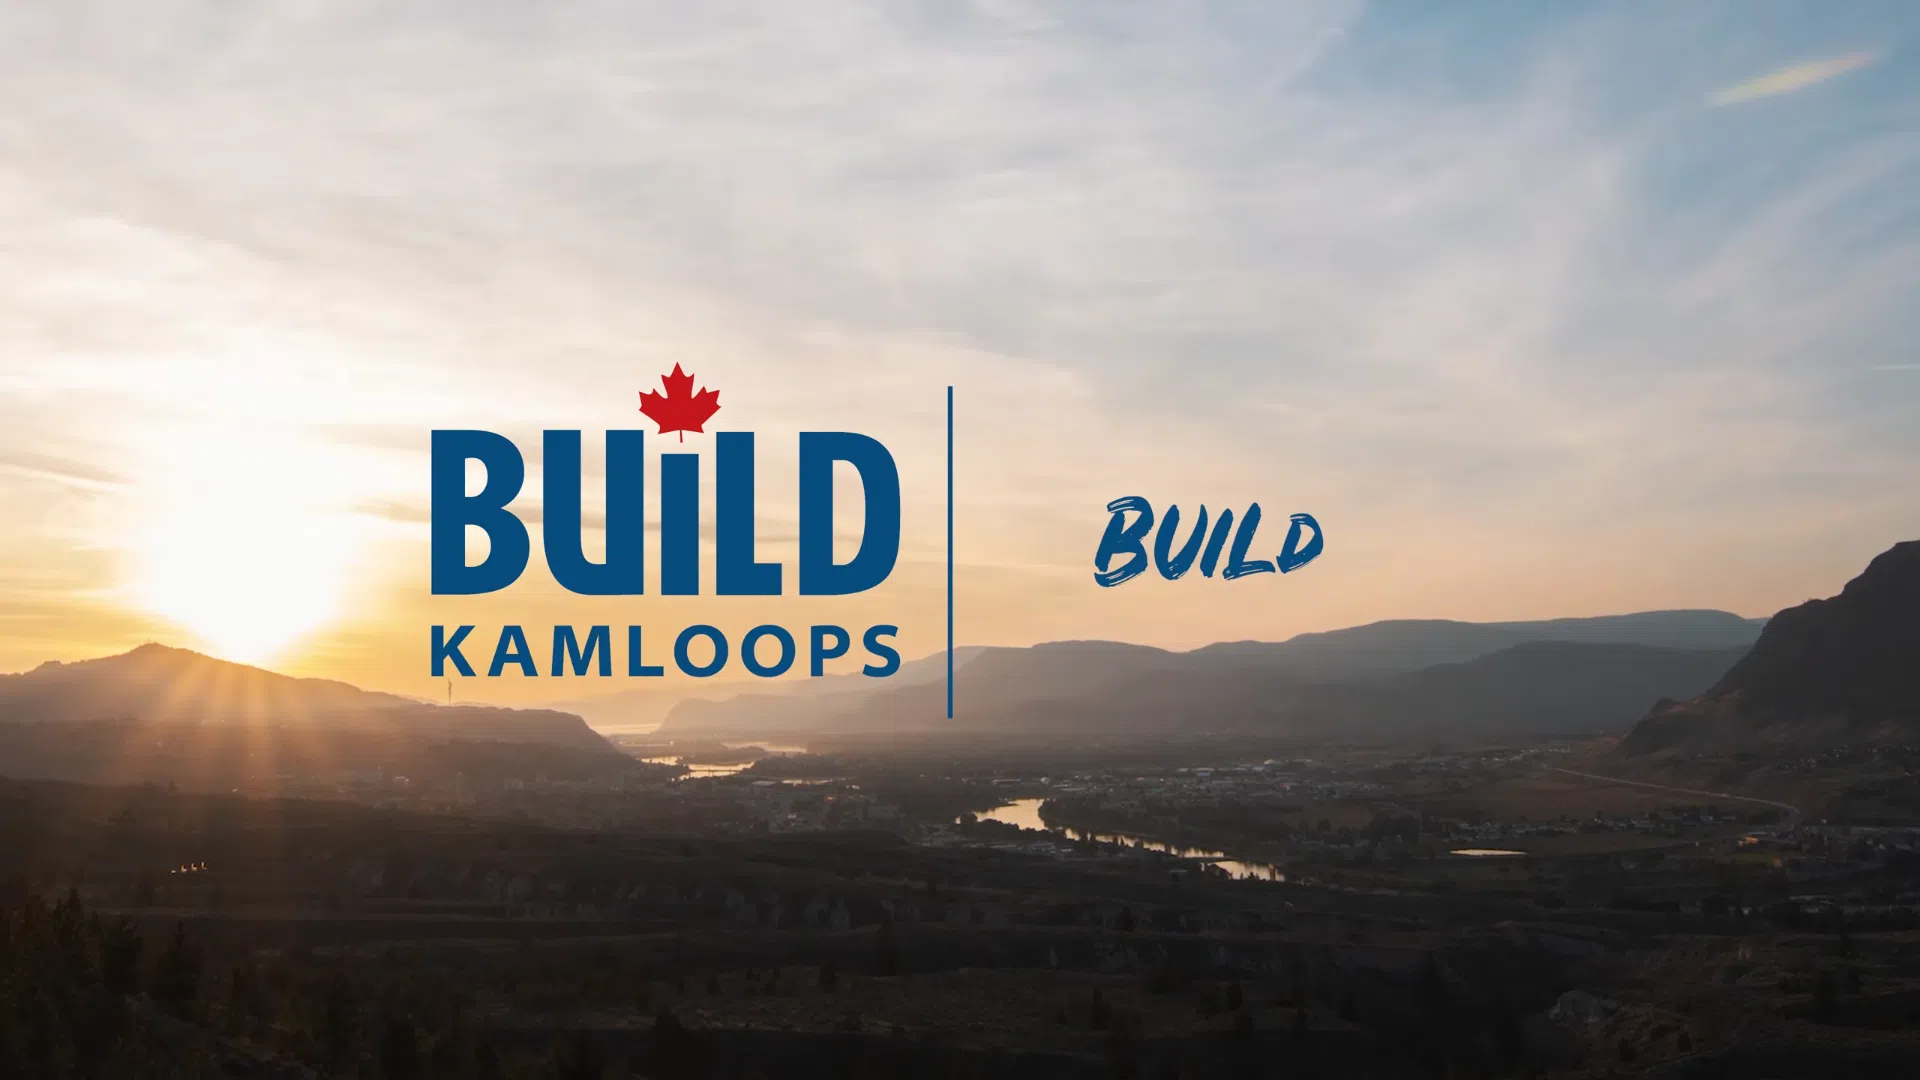 More details on Build Kamloops projects, costs expected to be made public Tuesday